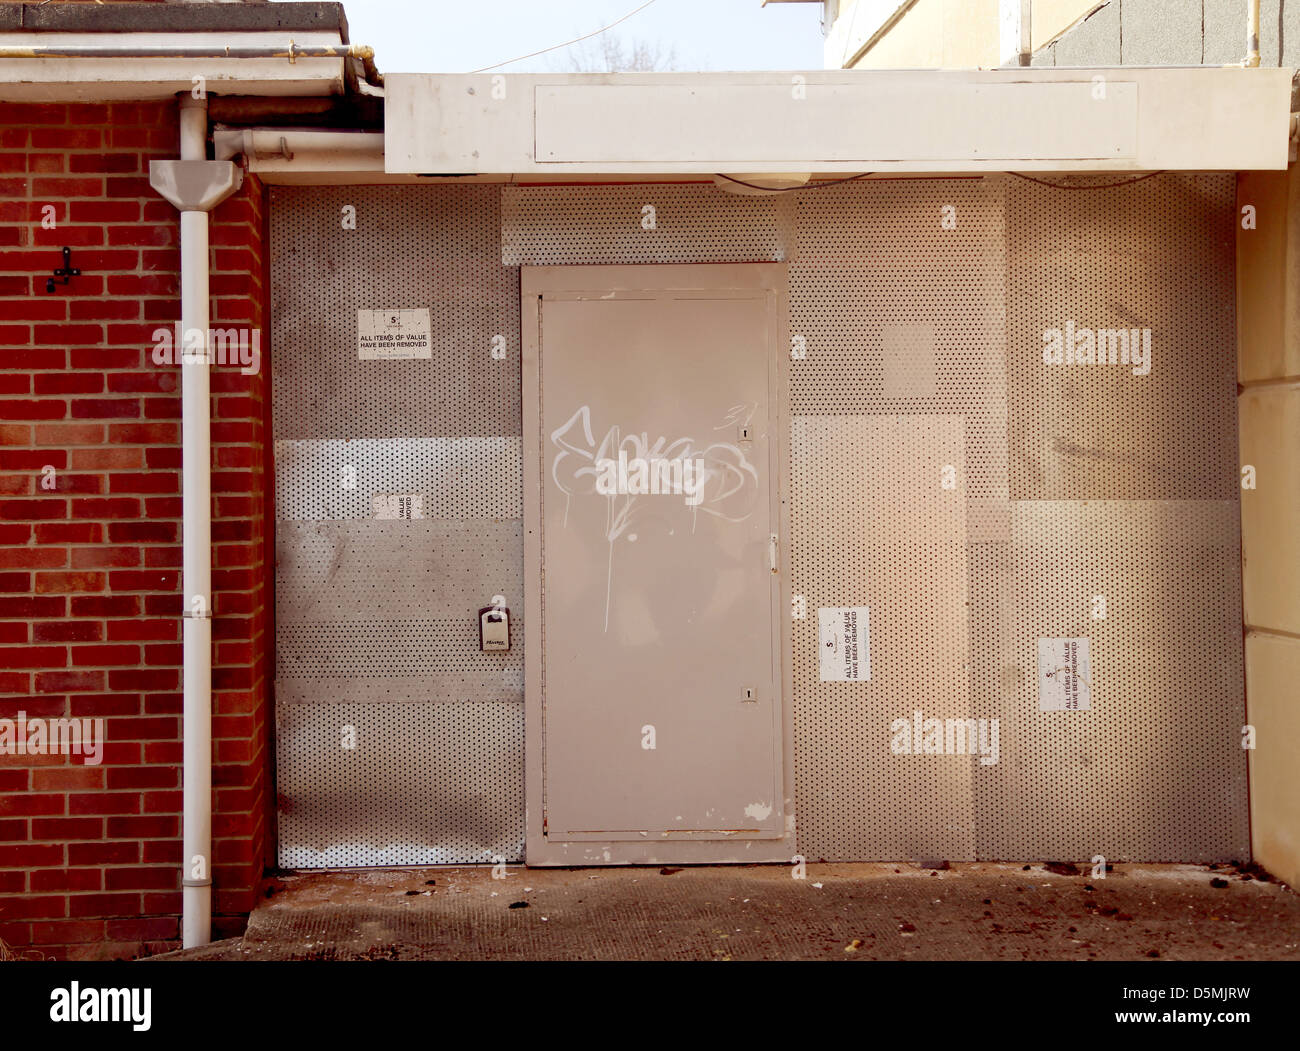 Securely shuttered up door to an empty building, with steel plates fixed over window and door openings Stock Photo